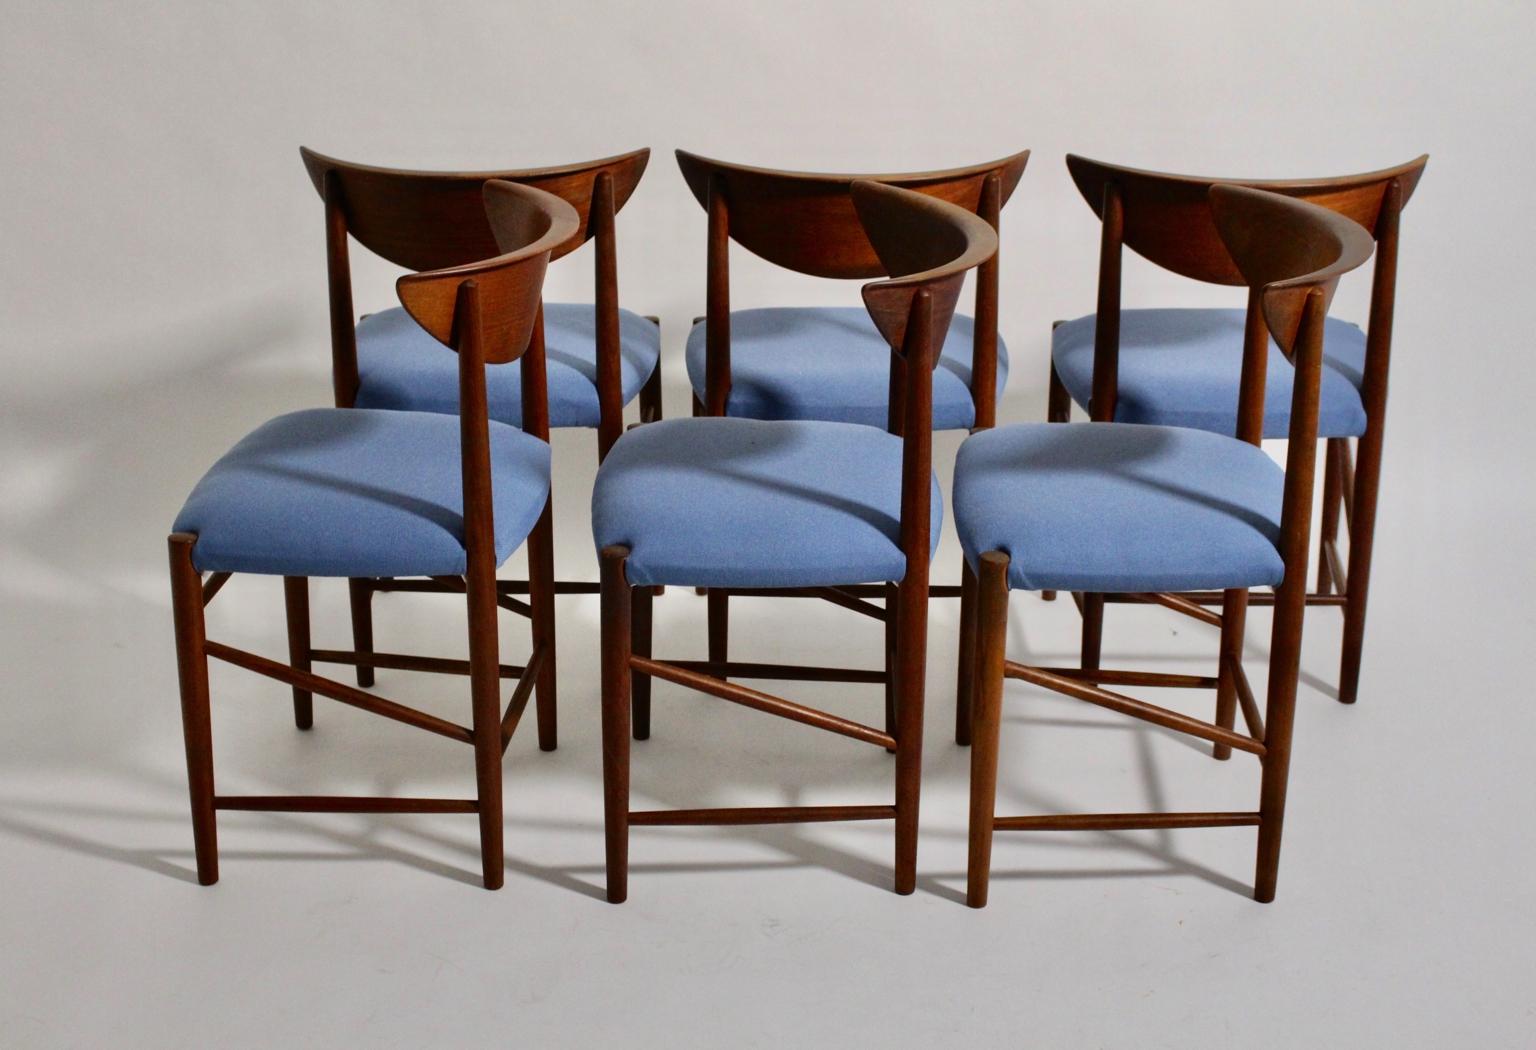 20th Century Scandinavian Modern Six Vintage Teak Dining Chairs or Chairs Peter Hvidt Denmark For Sale